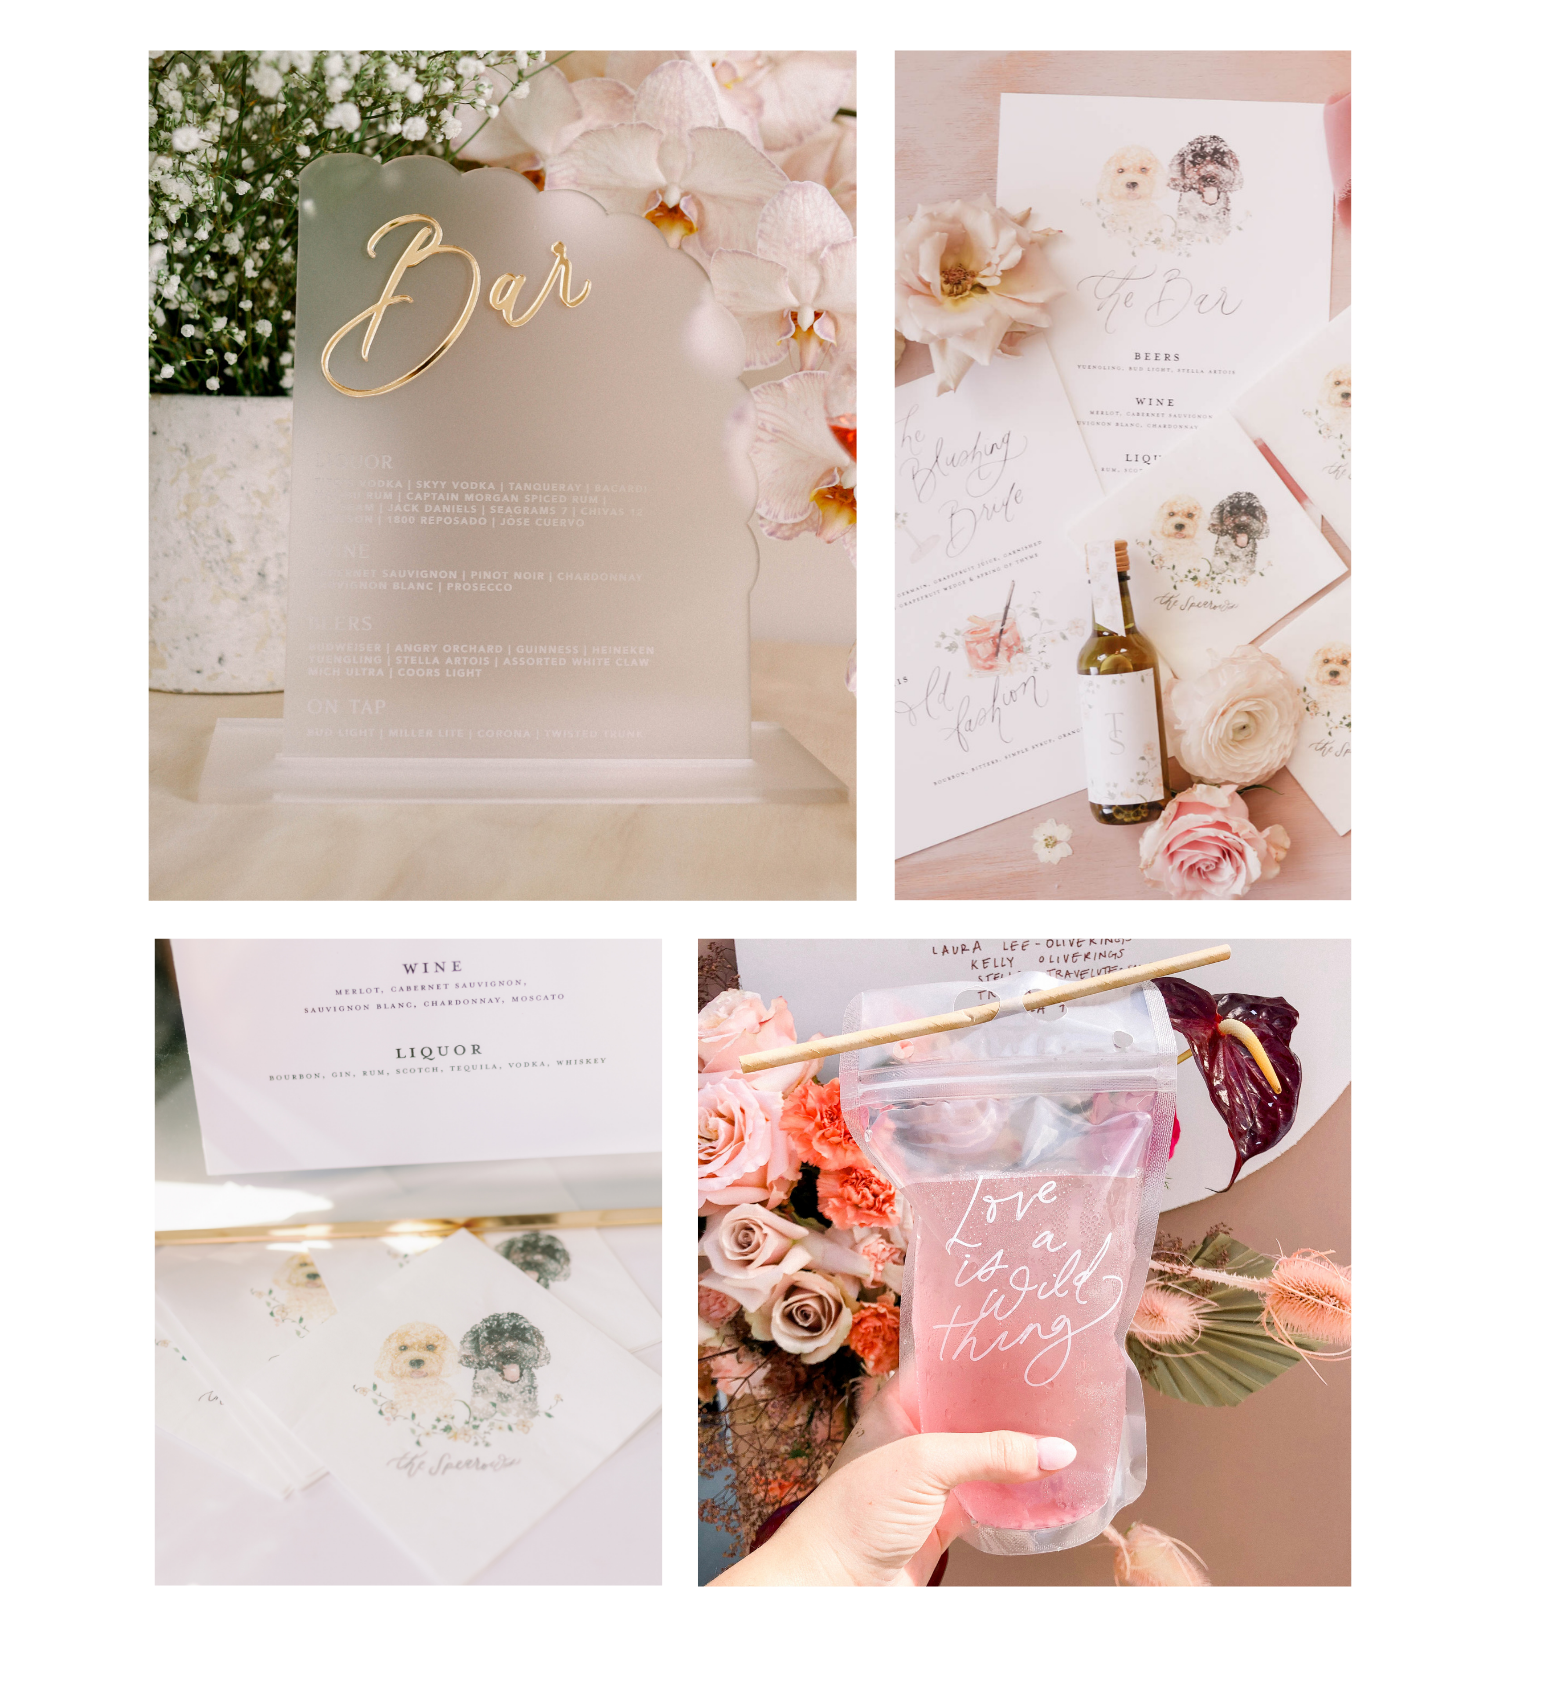 wedding day shopping list items - cocktail hour